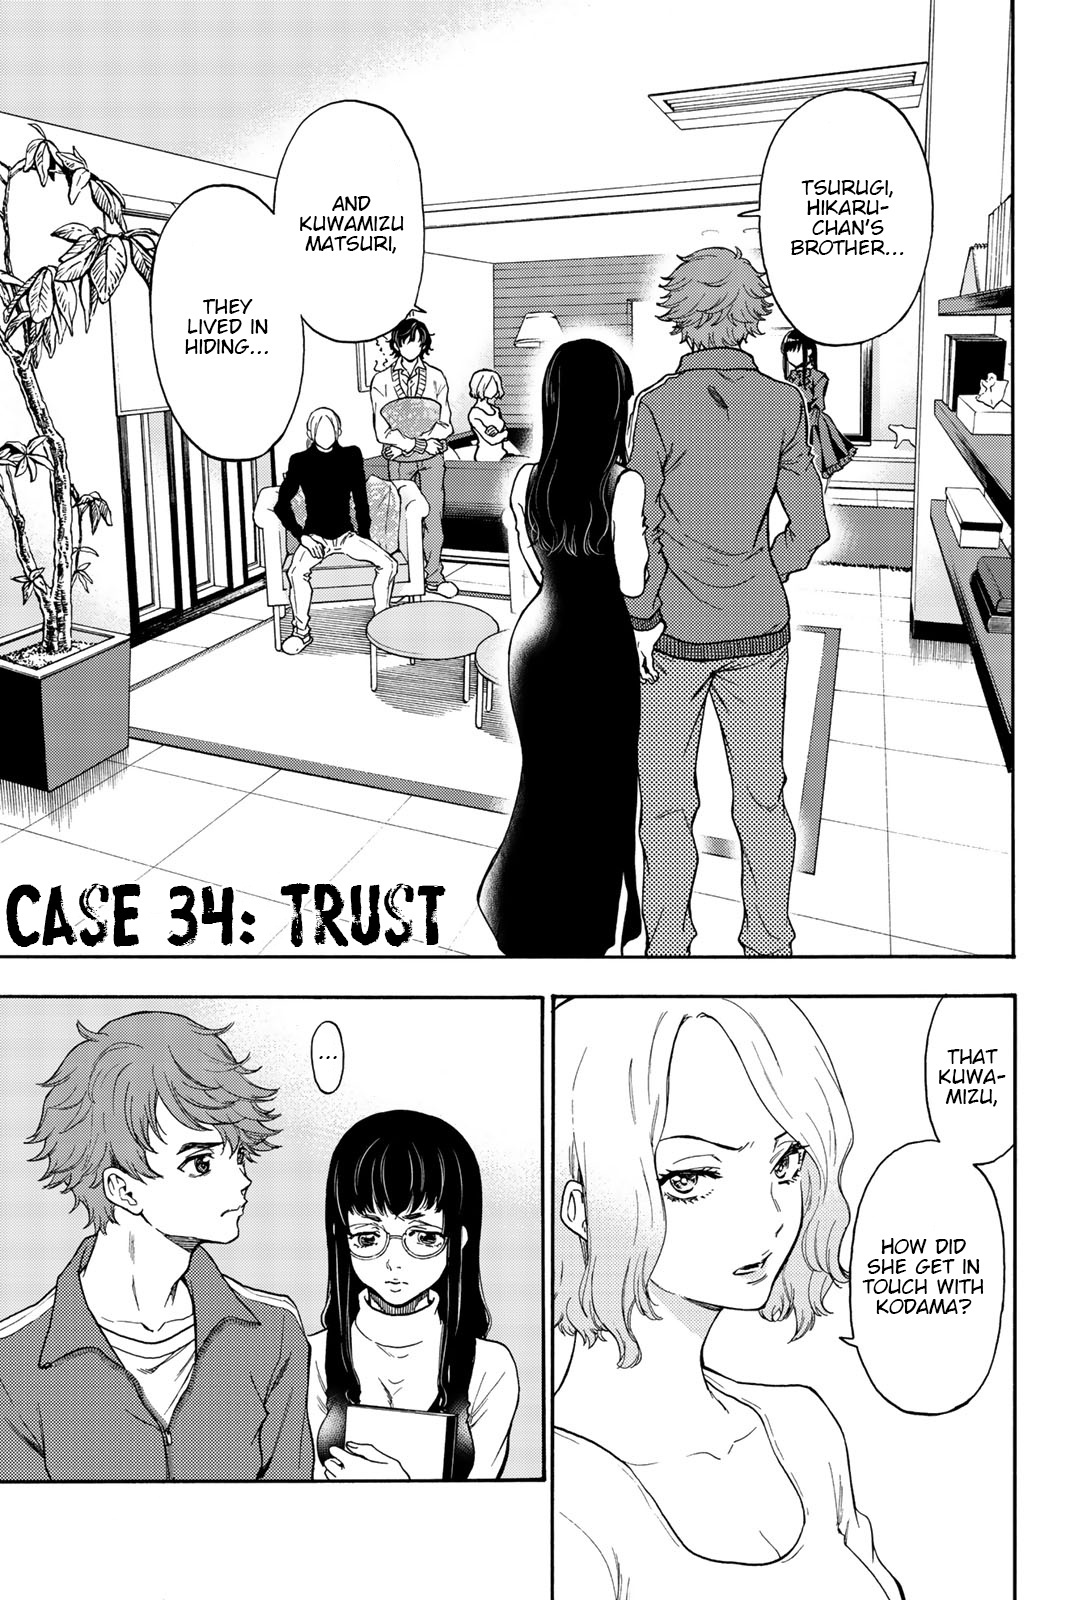 This Man Vol.4 Chapter 34: Trust - Picture 1